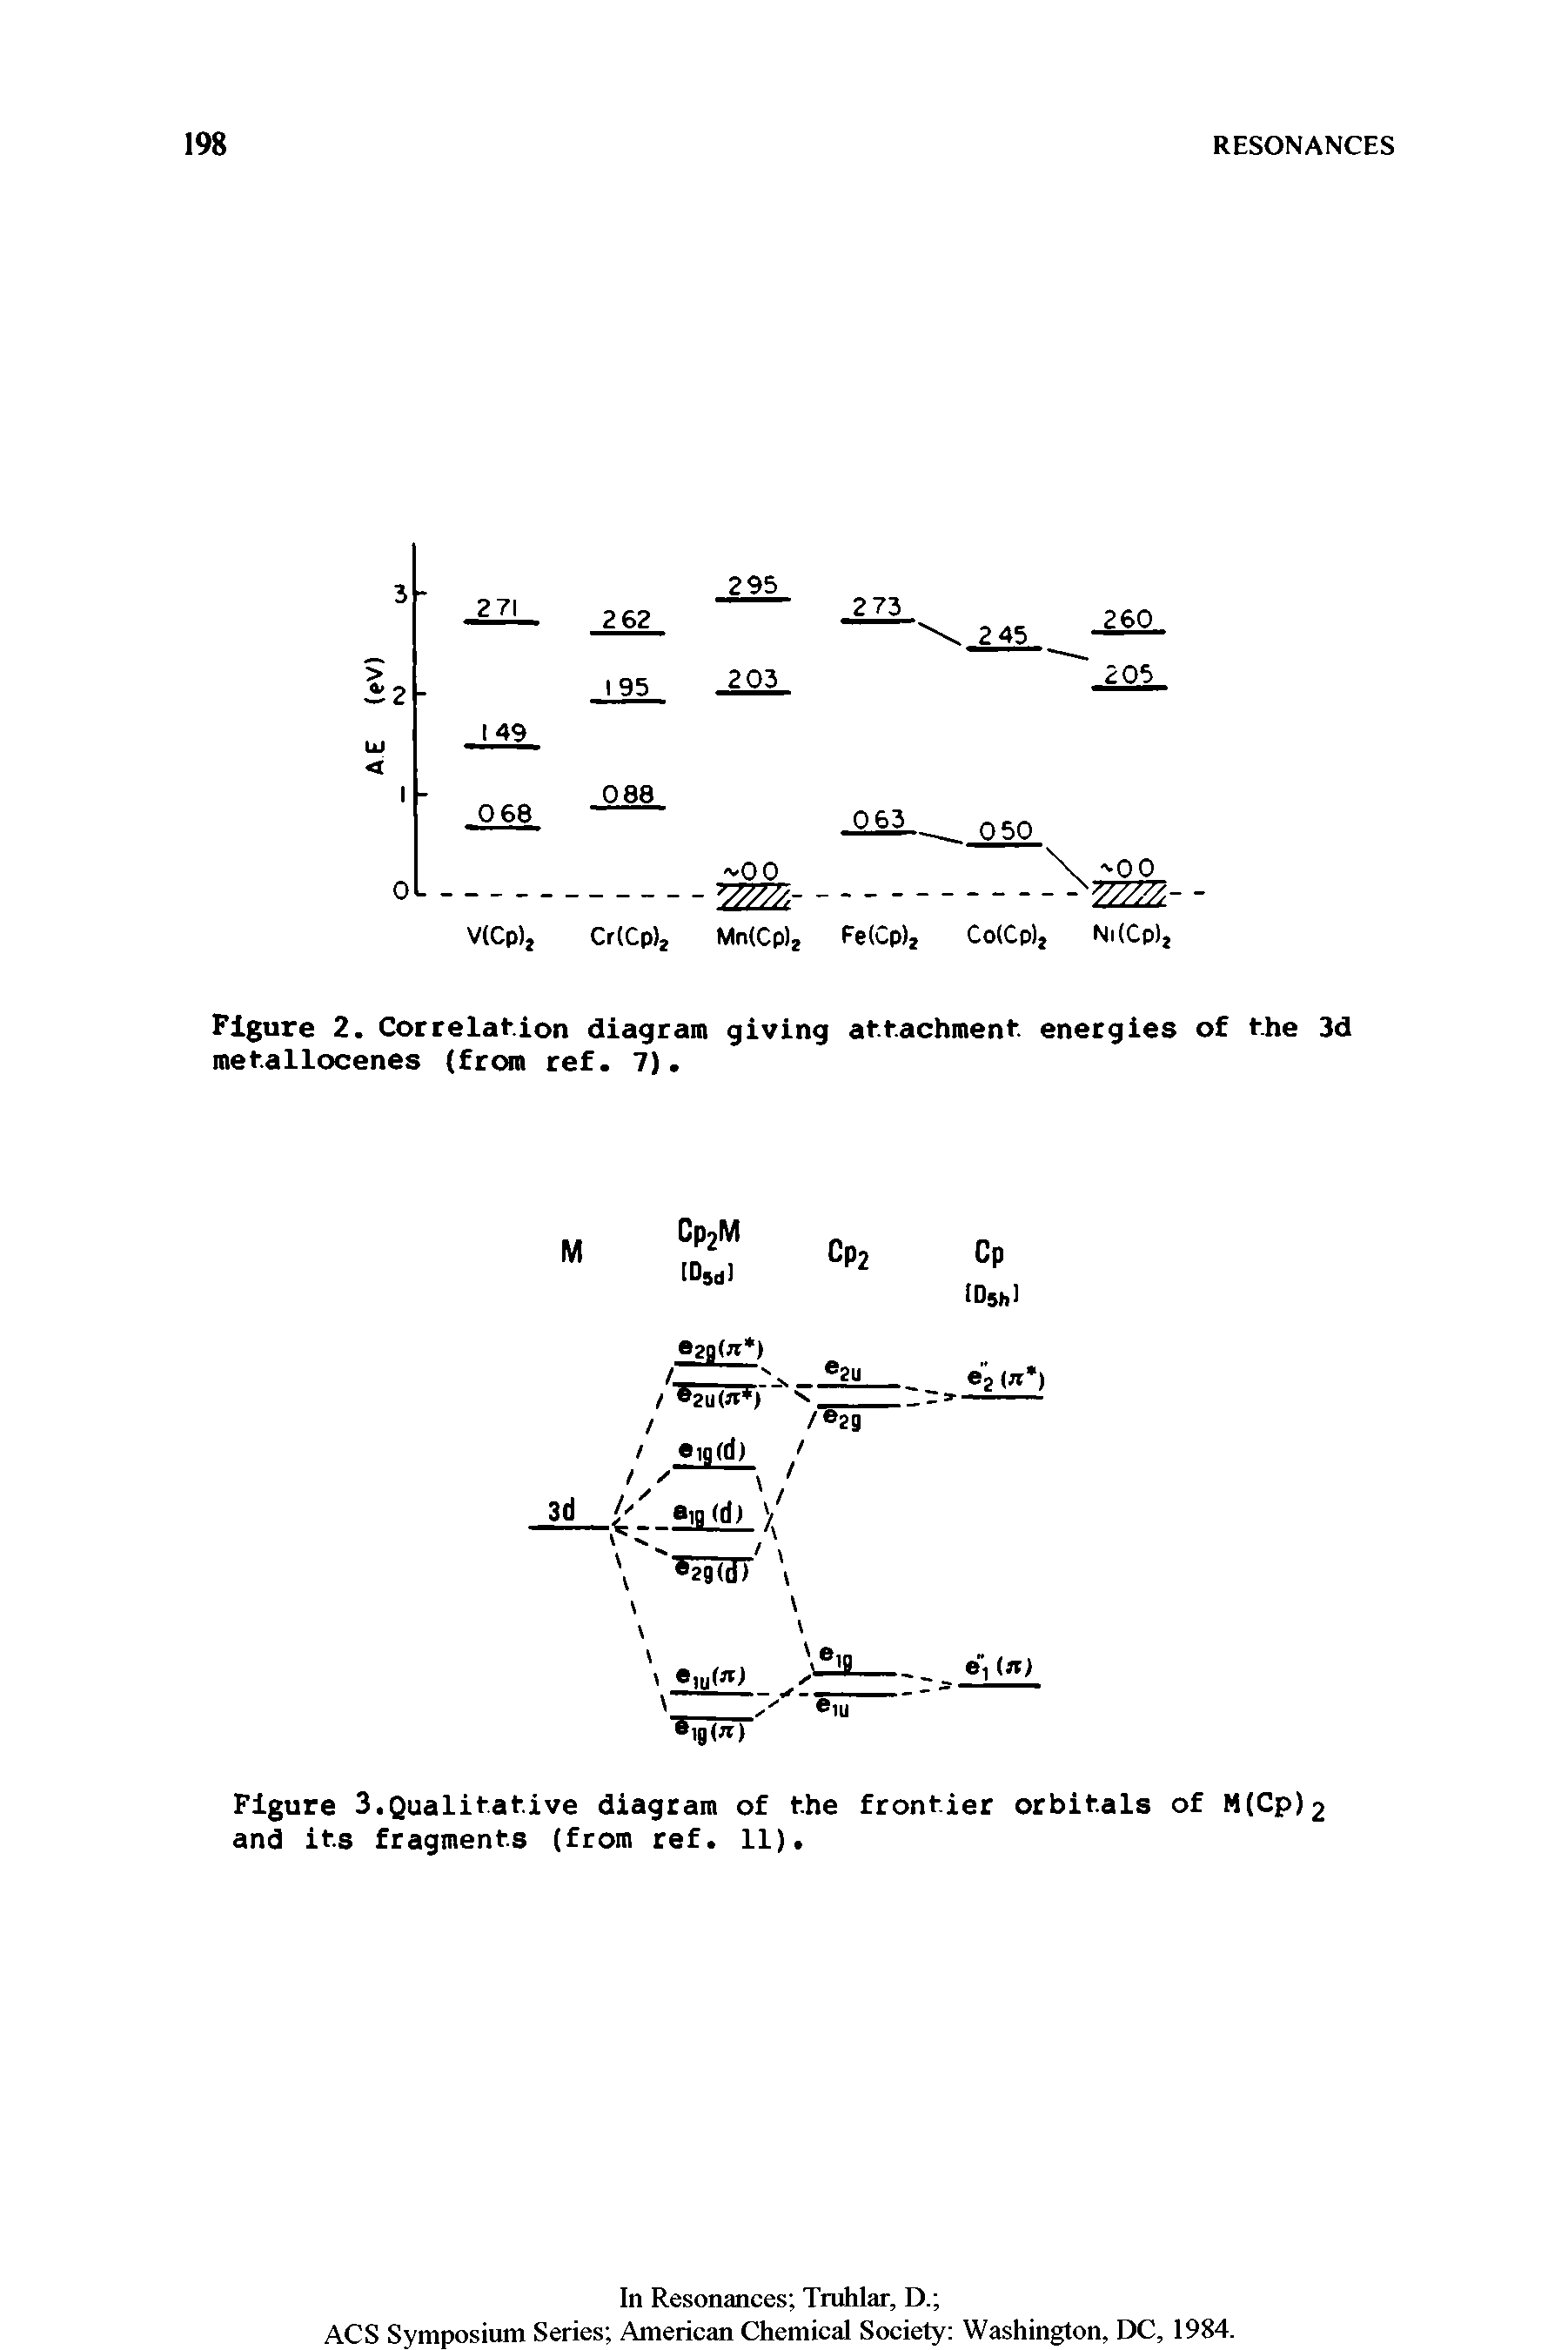 Figure 2. Correlation diagram giving attachment energies of the 3d metallocenes (from ref. 7).